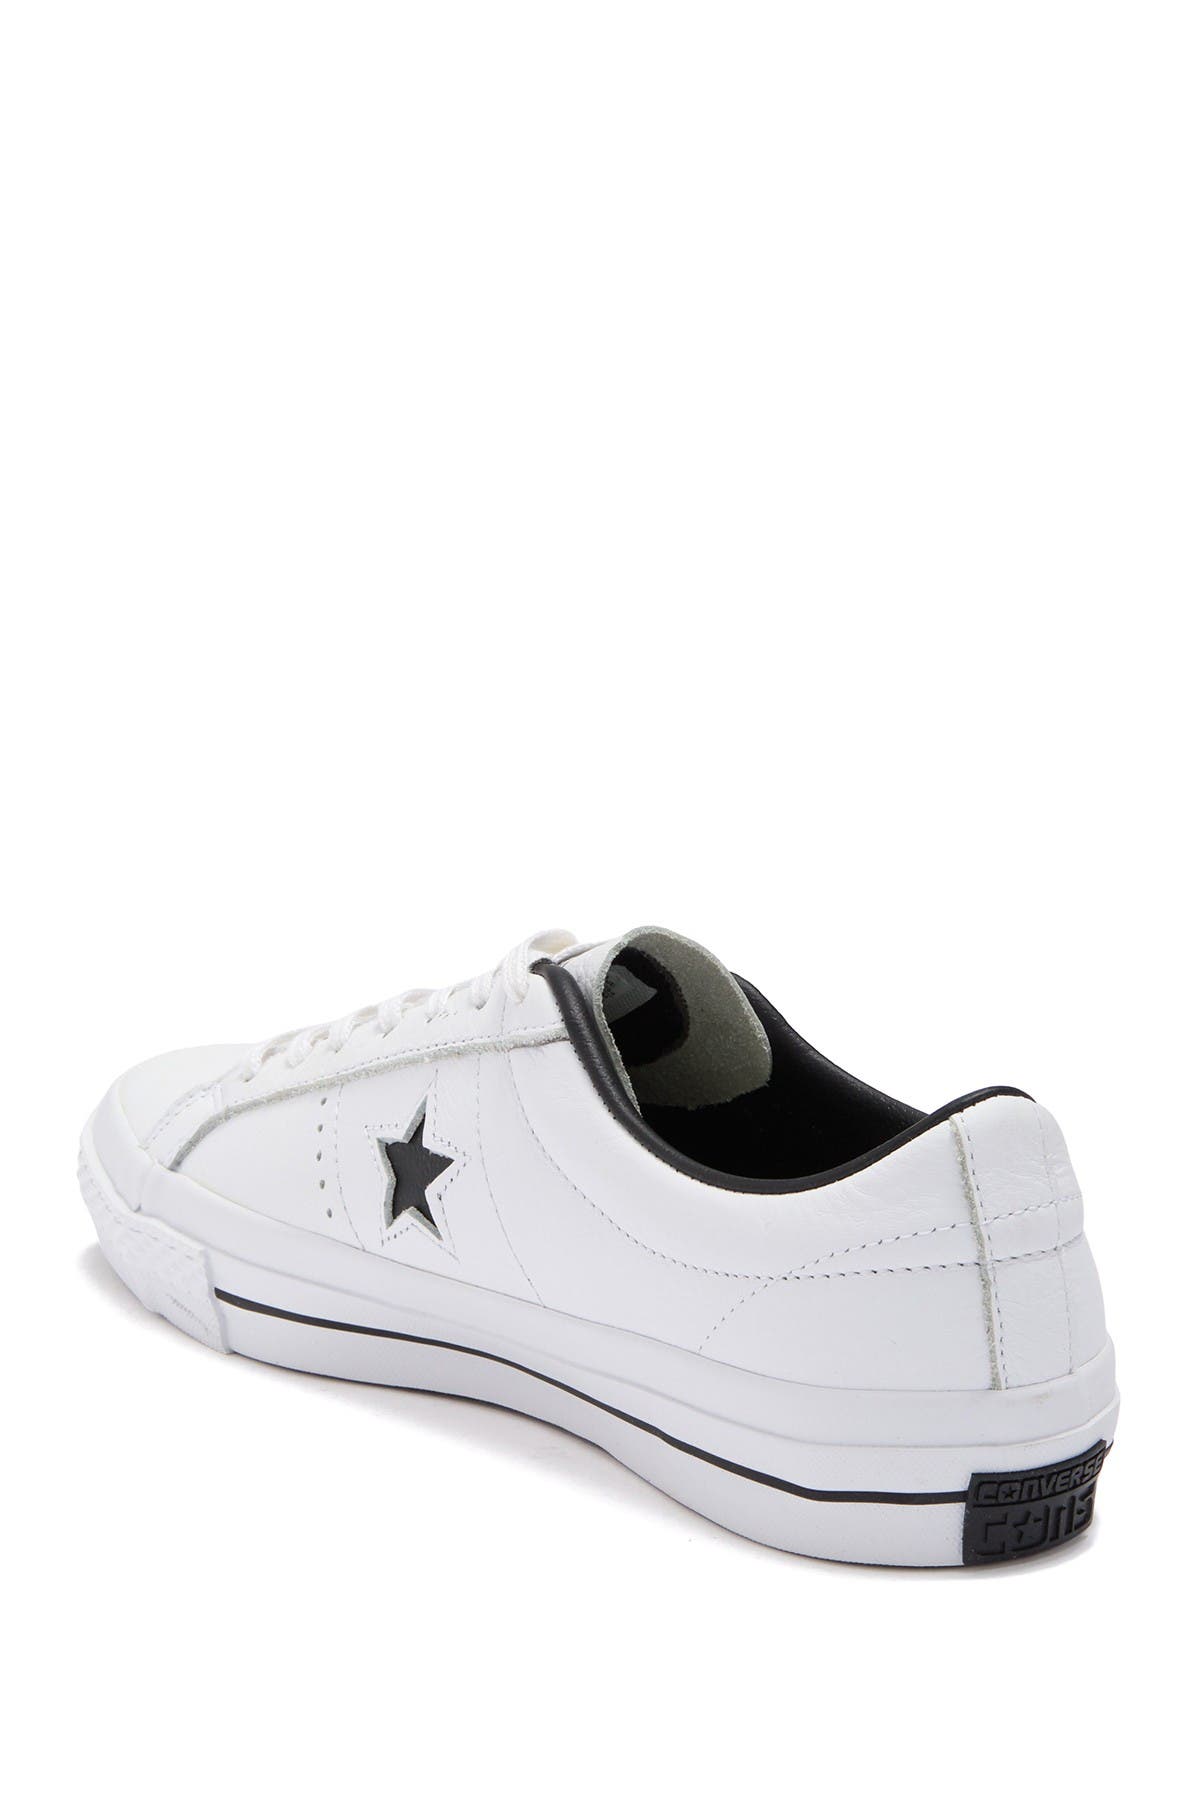 converse one star oxford